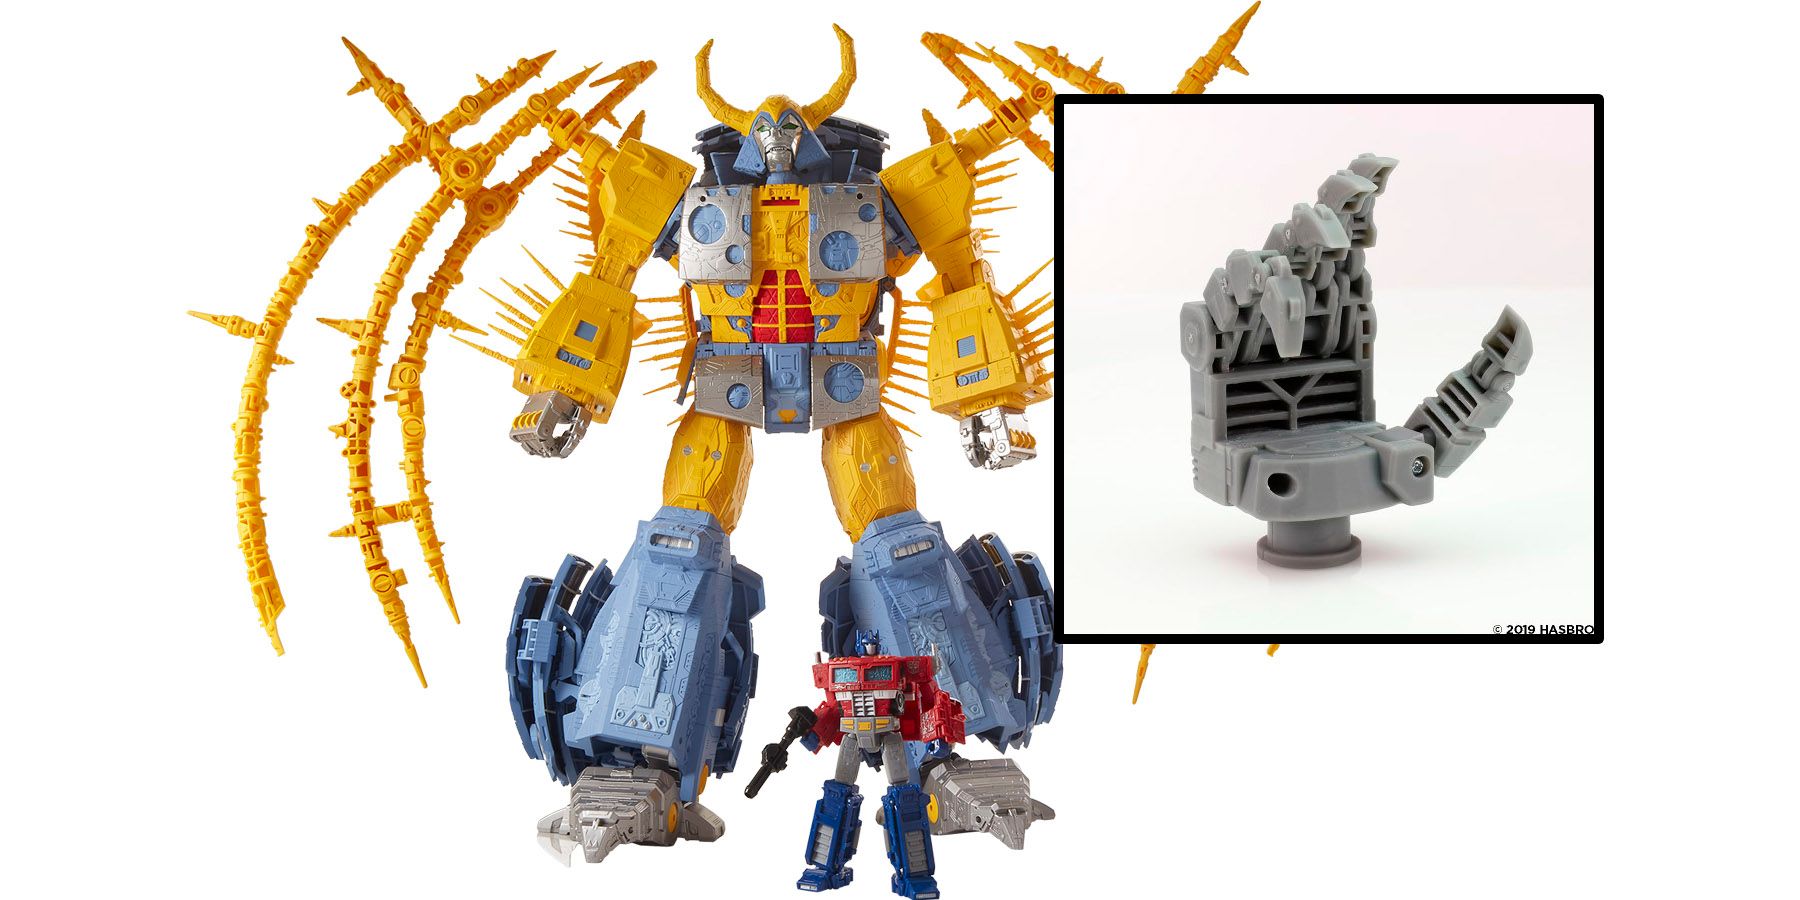 Exclusive The Biggest Transformers Figure Ever Gets an Upgrade